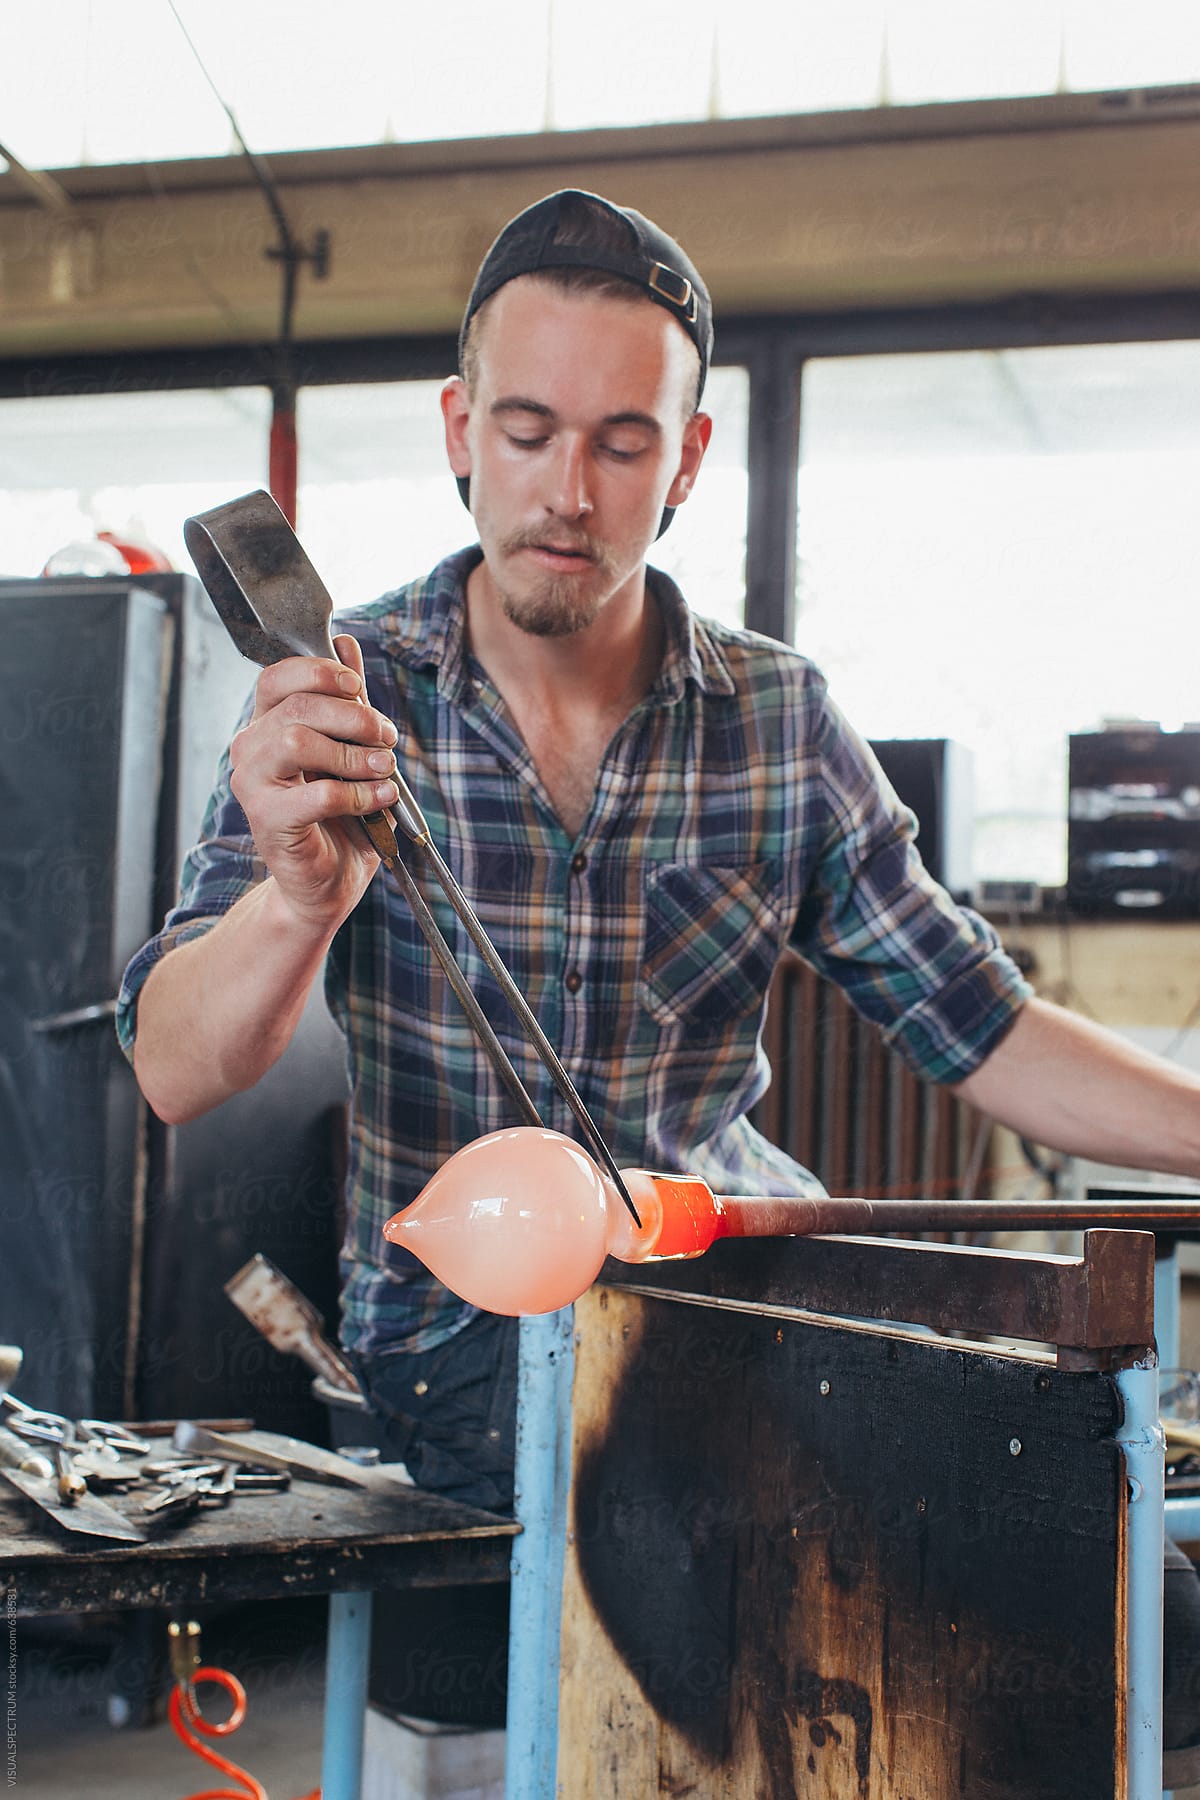 Artisan Glass Workshop - Portrait of Young Male Artist Shaping Hot Glass With Jacks